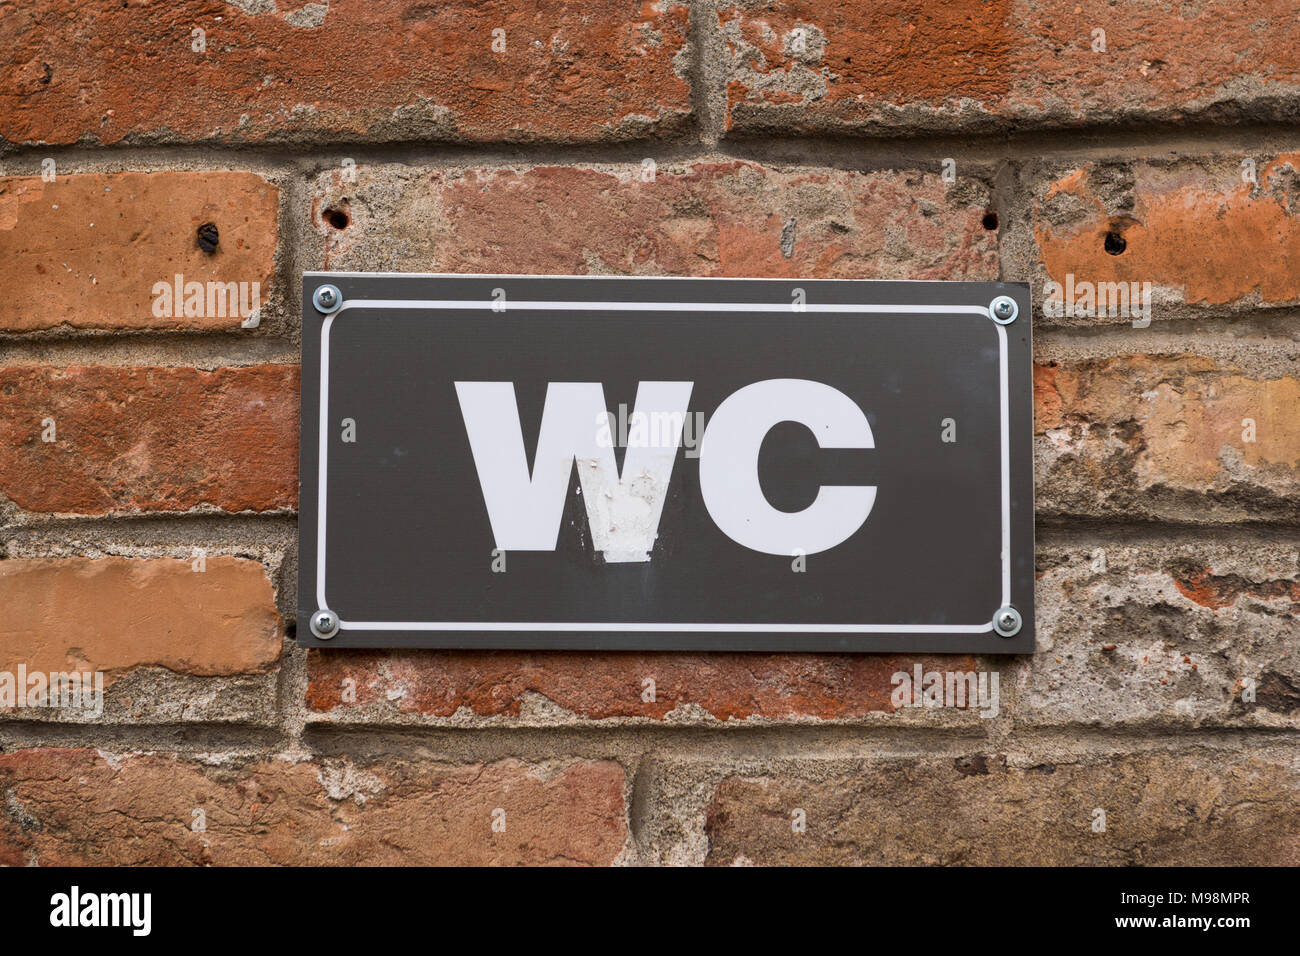 Toilet WC sign on old red brick wall. White WC sign on black metal plate. Outdoor sign. Stock Photo